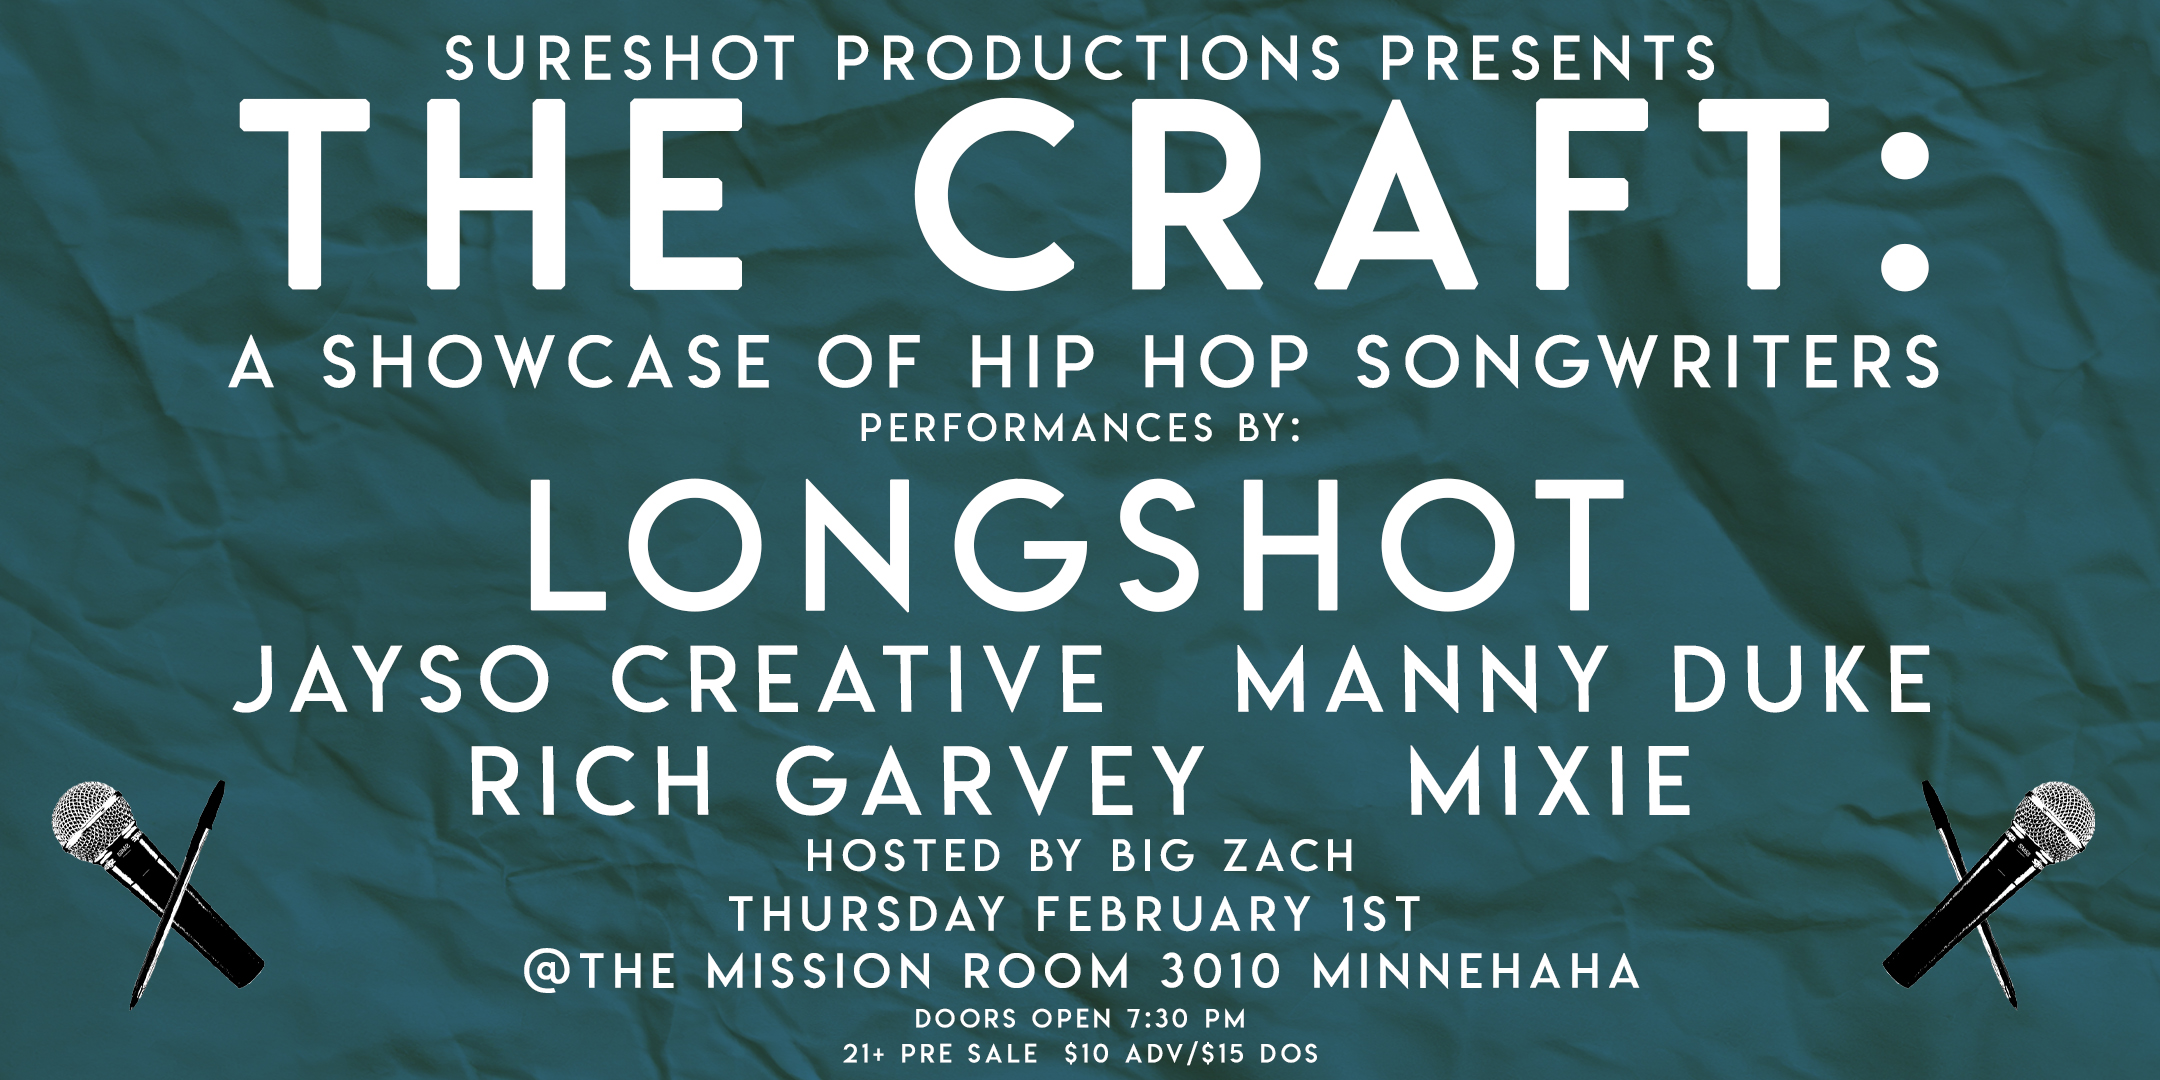 SureShot Productions Presents The Craft A Showcase of Hip Hop Songwriters Performances by: Longshot | Jayso Creative | Rich Garvey | Manny Duke | Mixie Hosted by: Big Zach Thursday February 1 The Mission Room at The Hook Doors 7:30pm :: Music 8:00pm :: 21+ General Admission $10 ADV / $15 DOS Tickets On-Sale Now